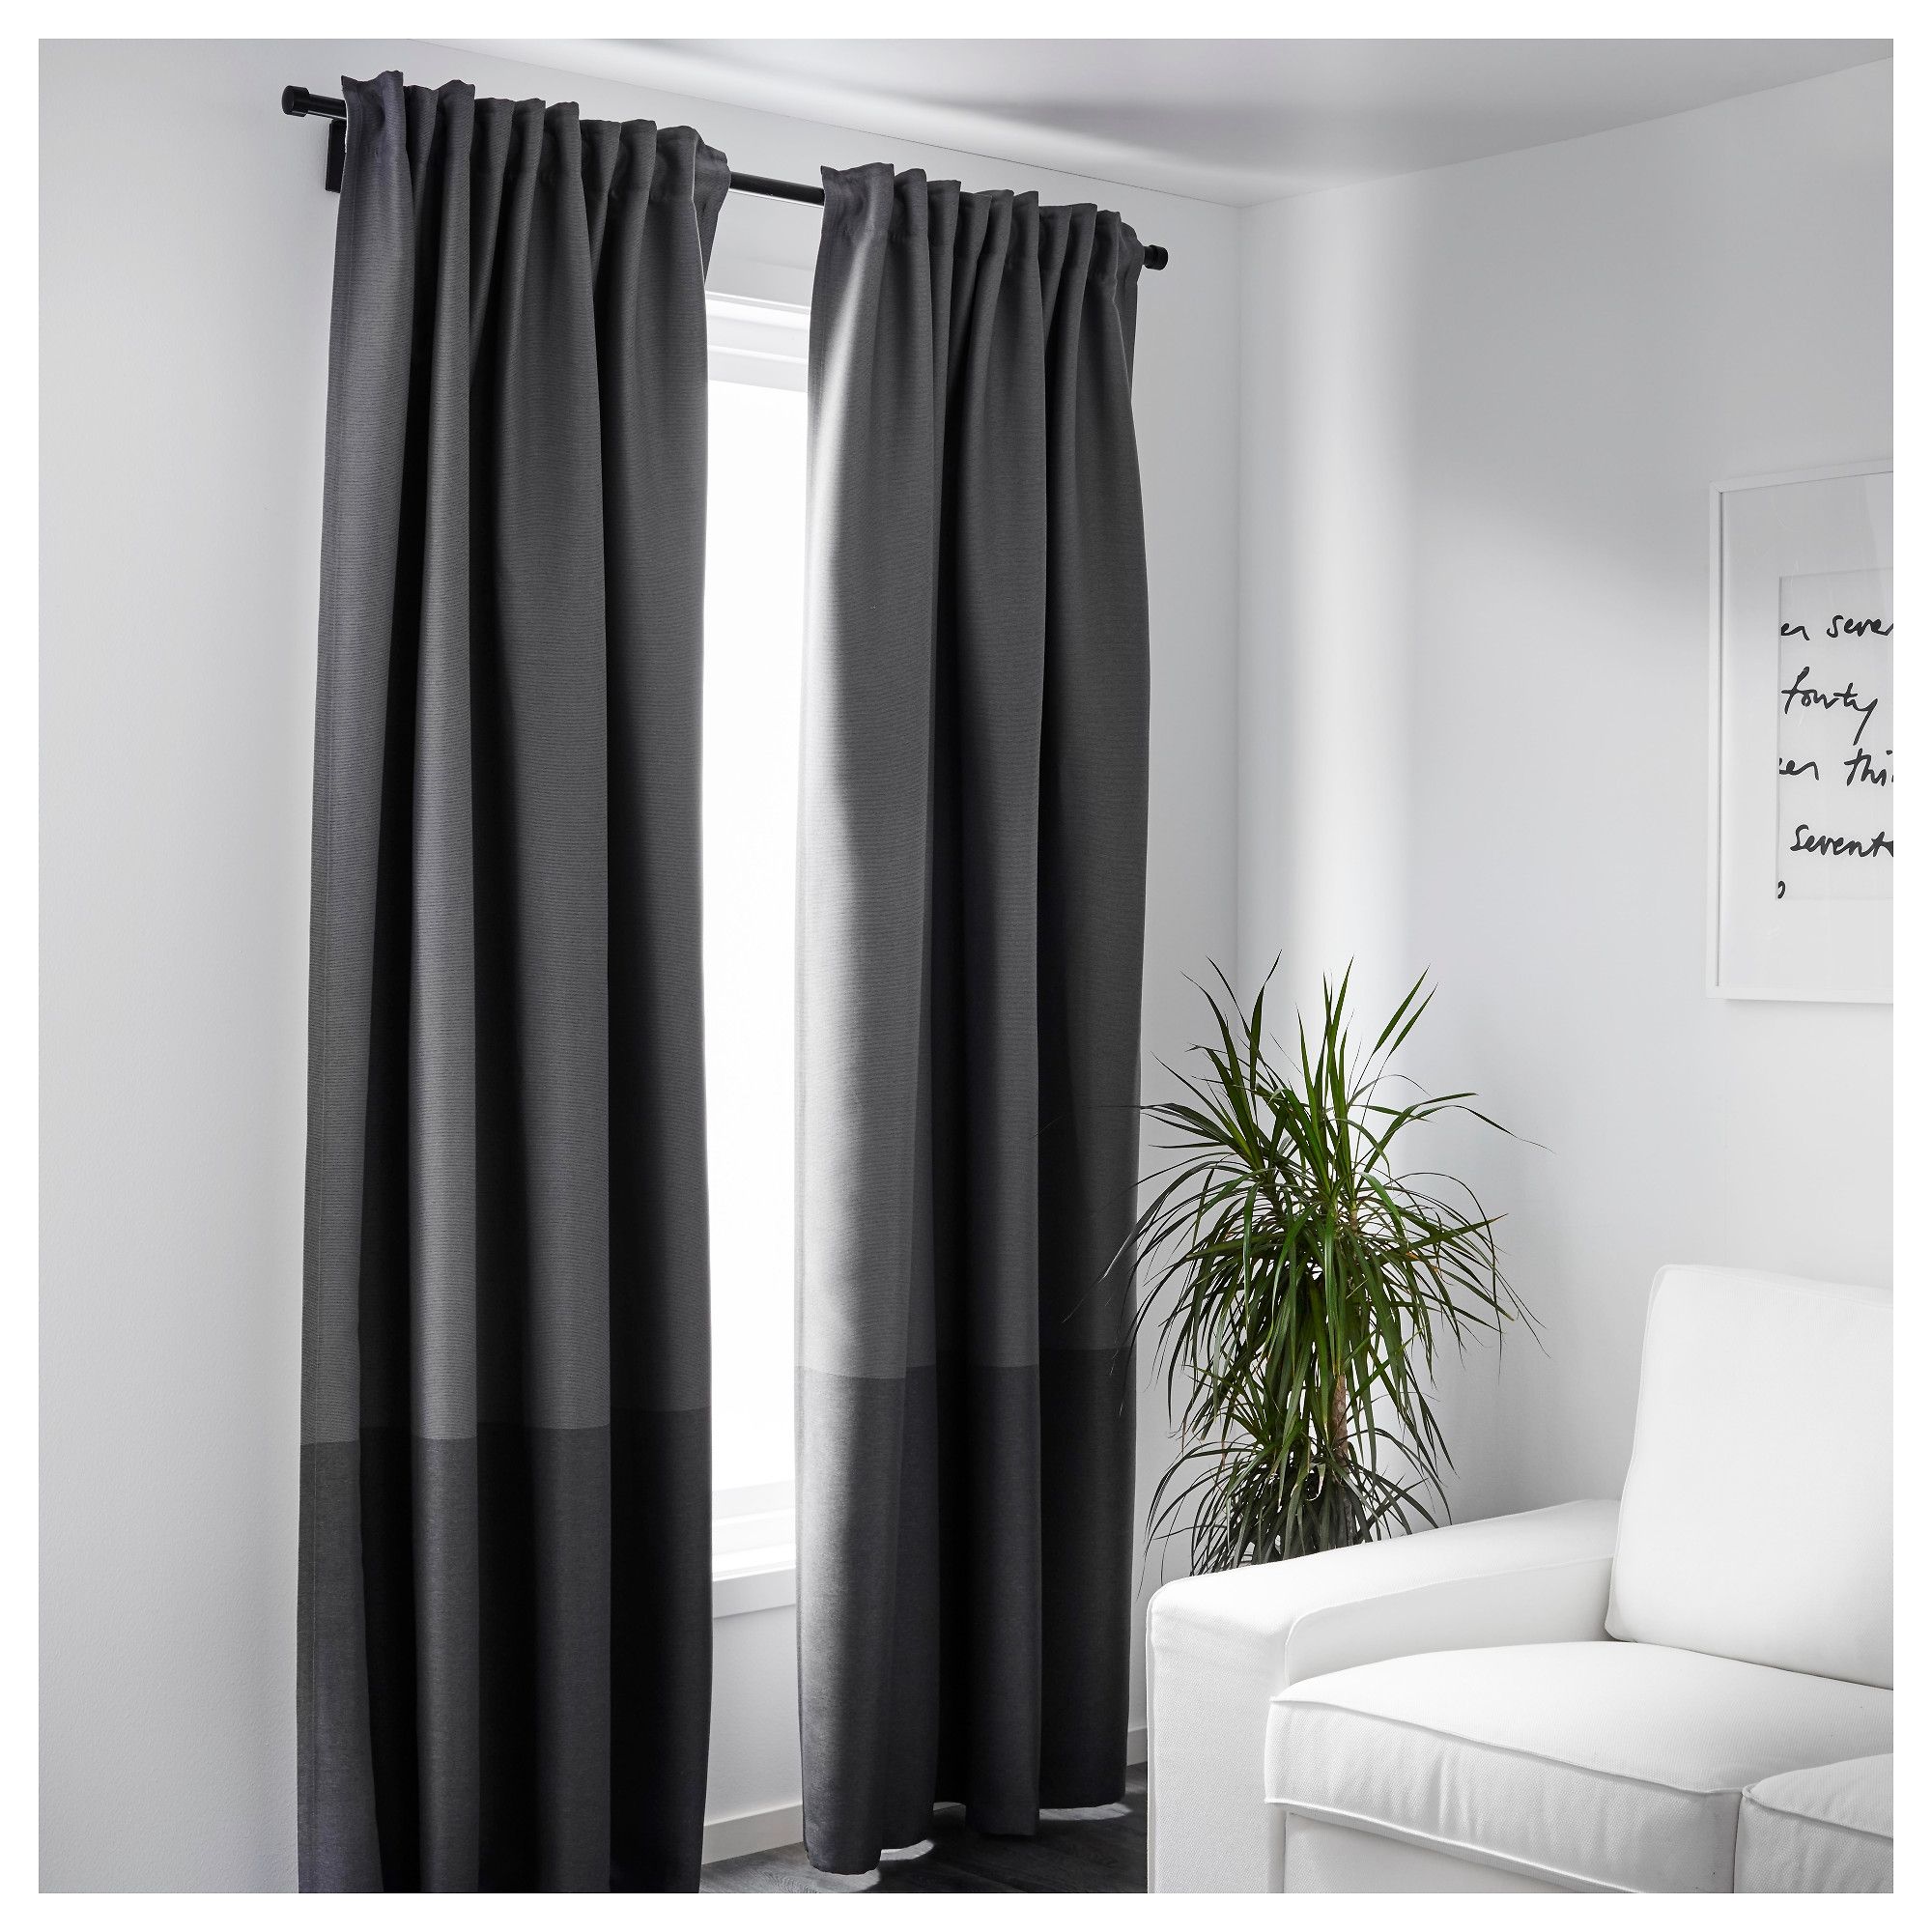 Marjun Blackout Curtains 1 Pair Ikea Inside White Thick Curtains (View 12 of 15)